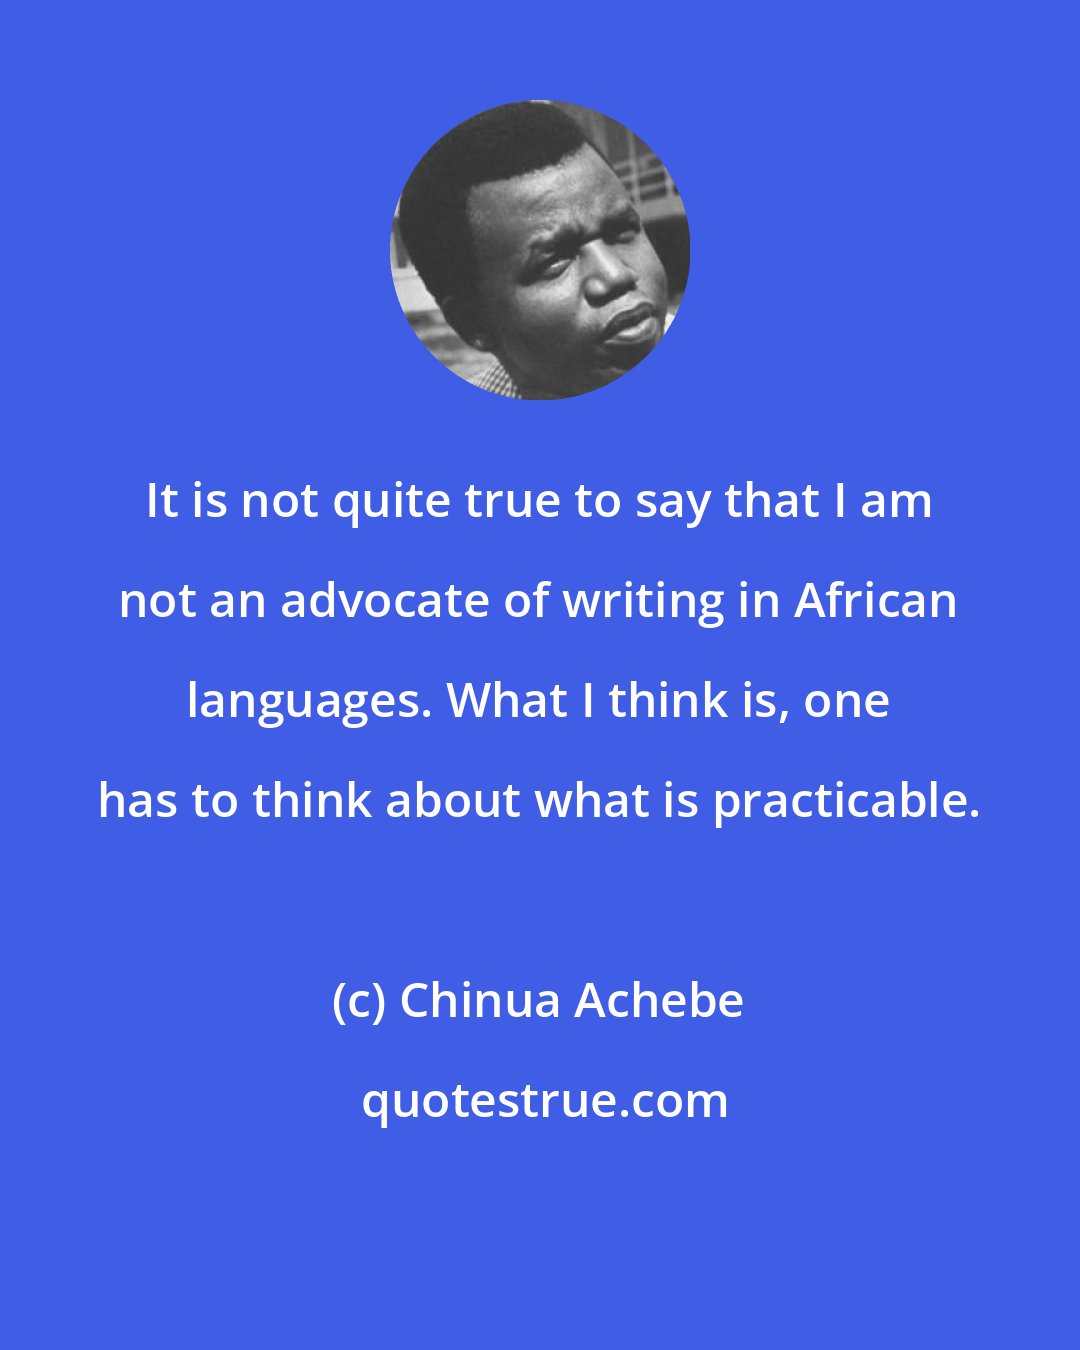 Chinua Achebe: It is not quite true to say that I am not an advocate of writing in African languages. What I think is, one has to think about what is practicable.